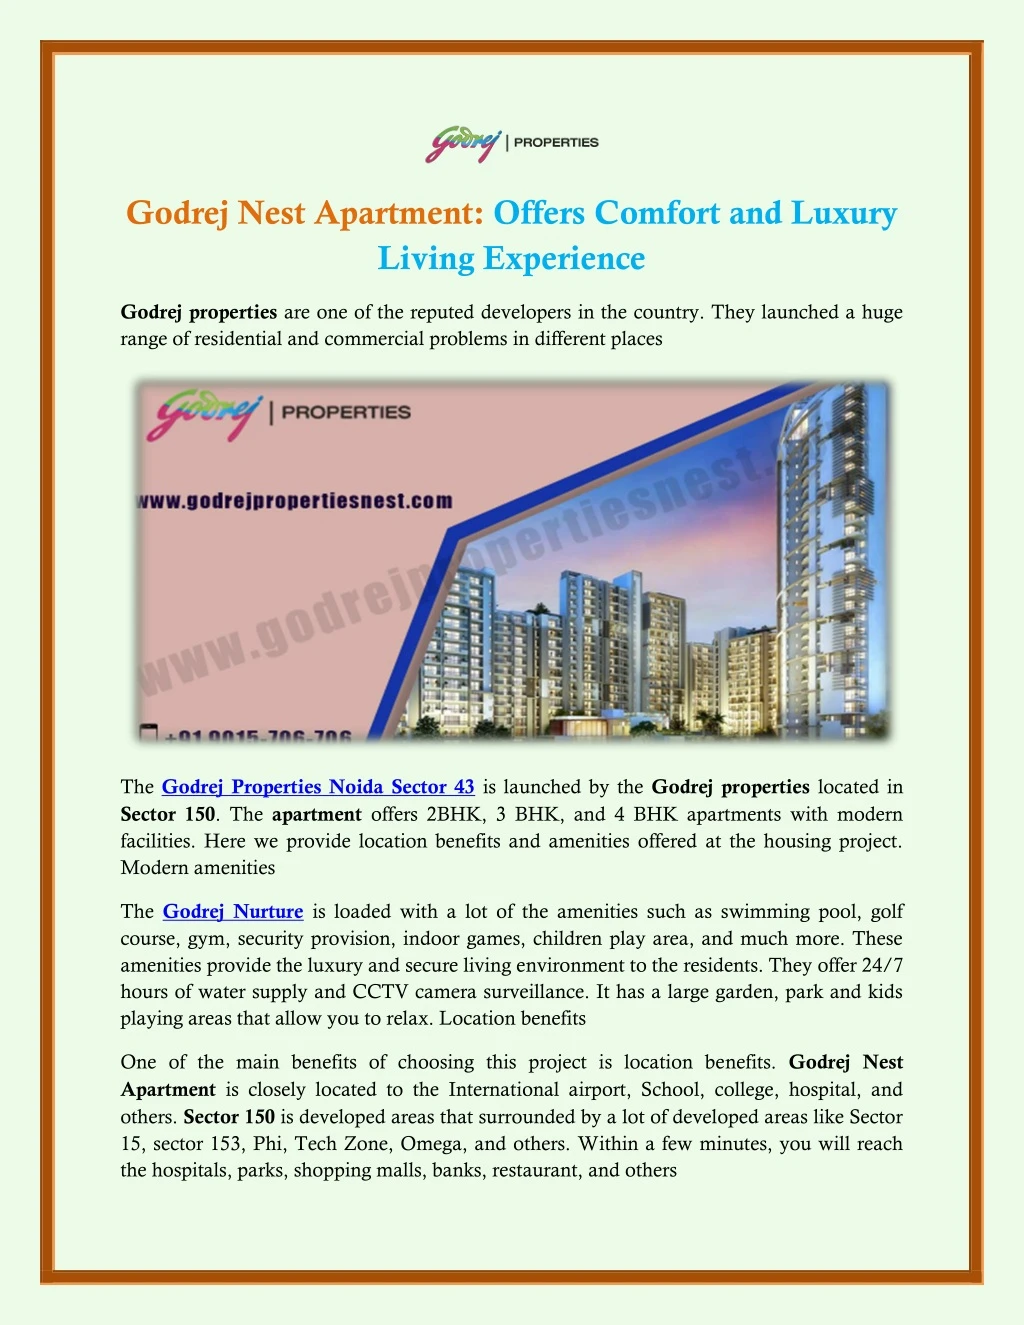 godrej nest apartment offers comfort and luxury